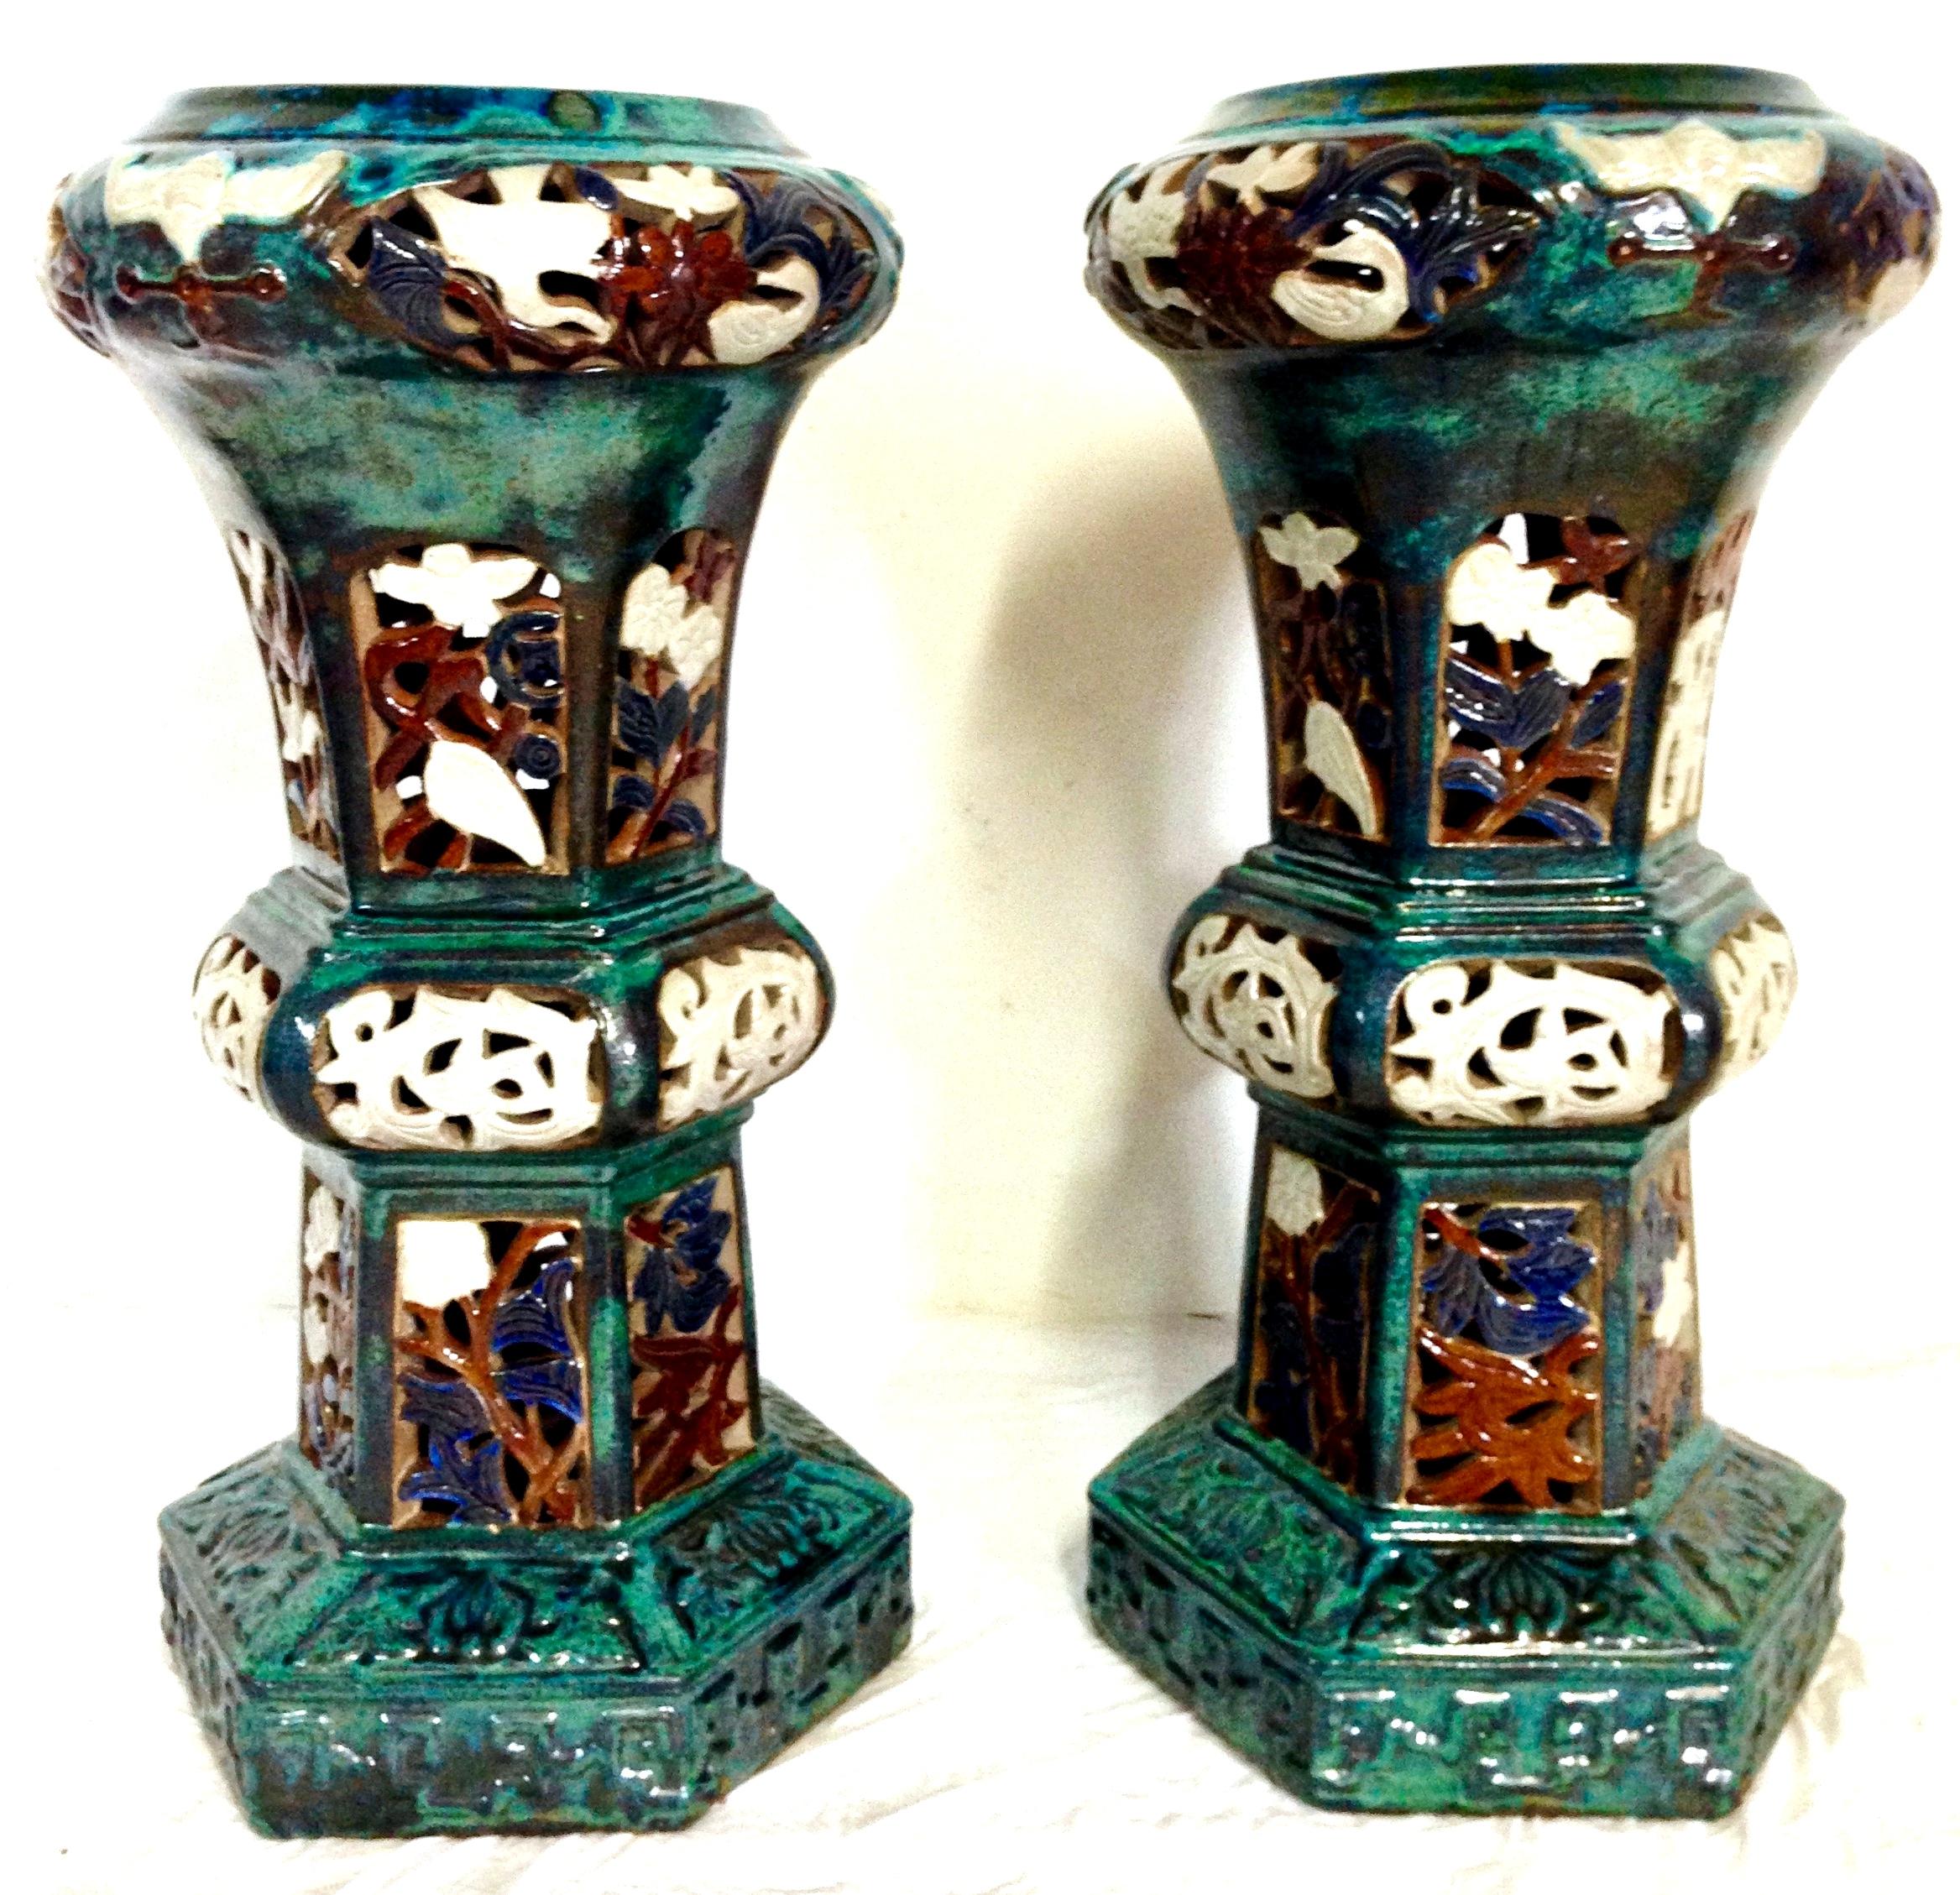 21st Century pair of ceramic glaze Chinese Export garden pedestals. Executed in a 